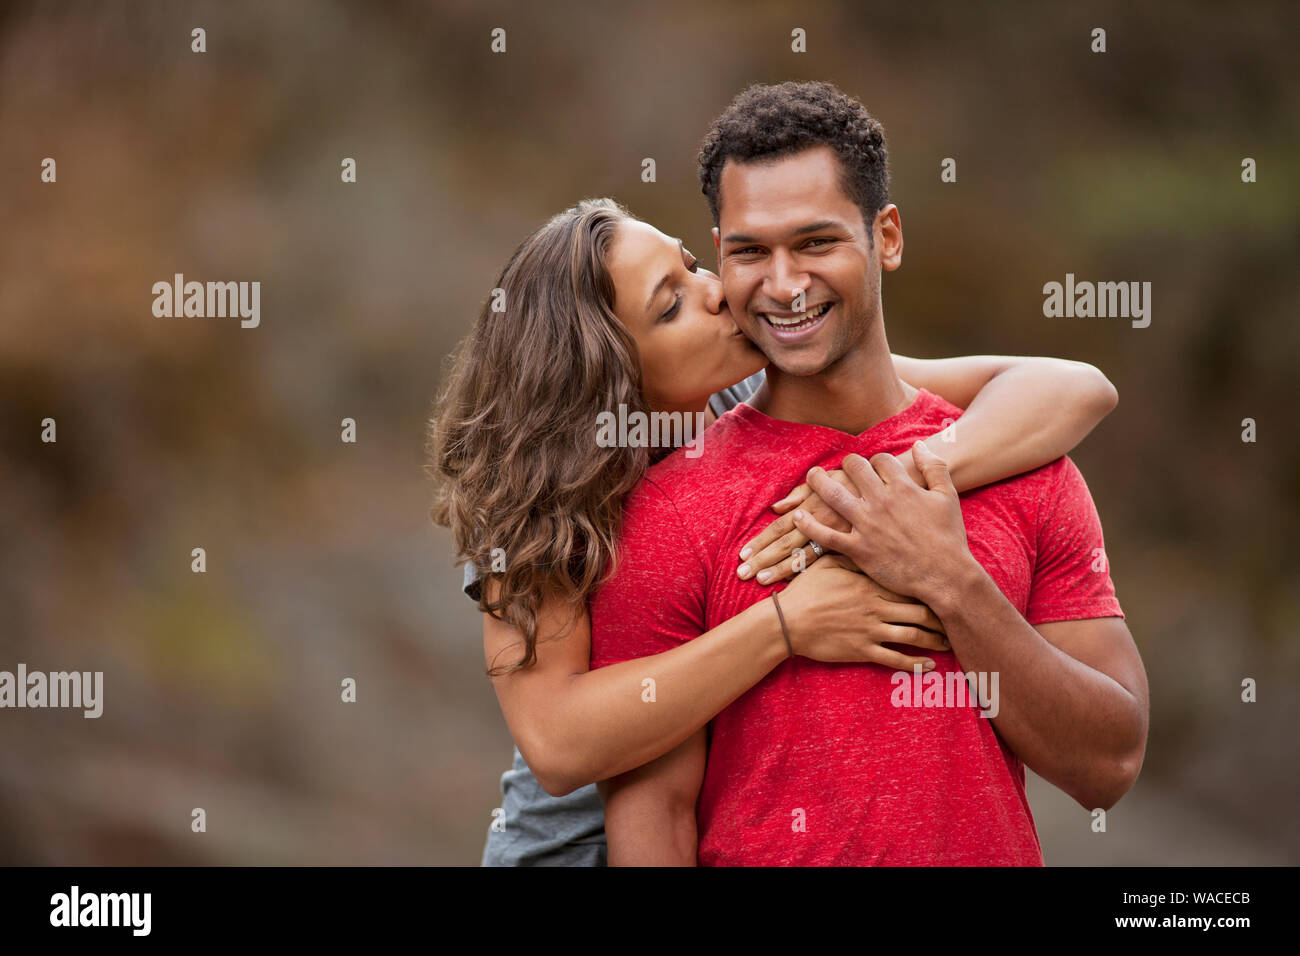 Portrait of a smiling young man being kissed on the cheek by his girlfriend. Stock Photo